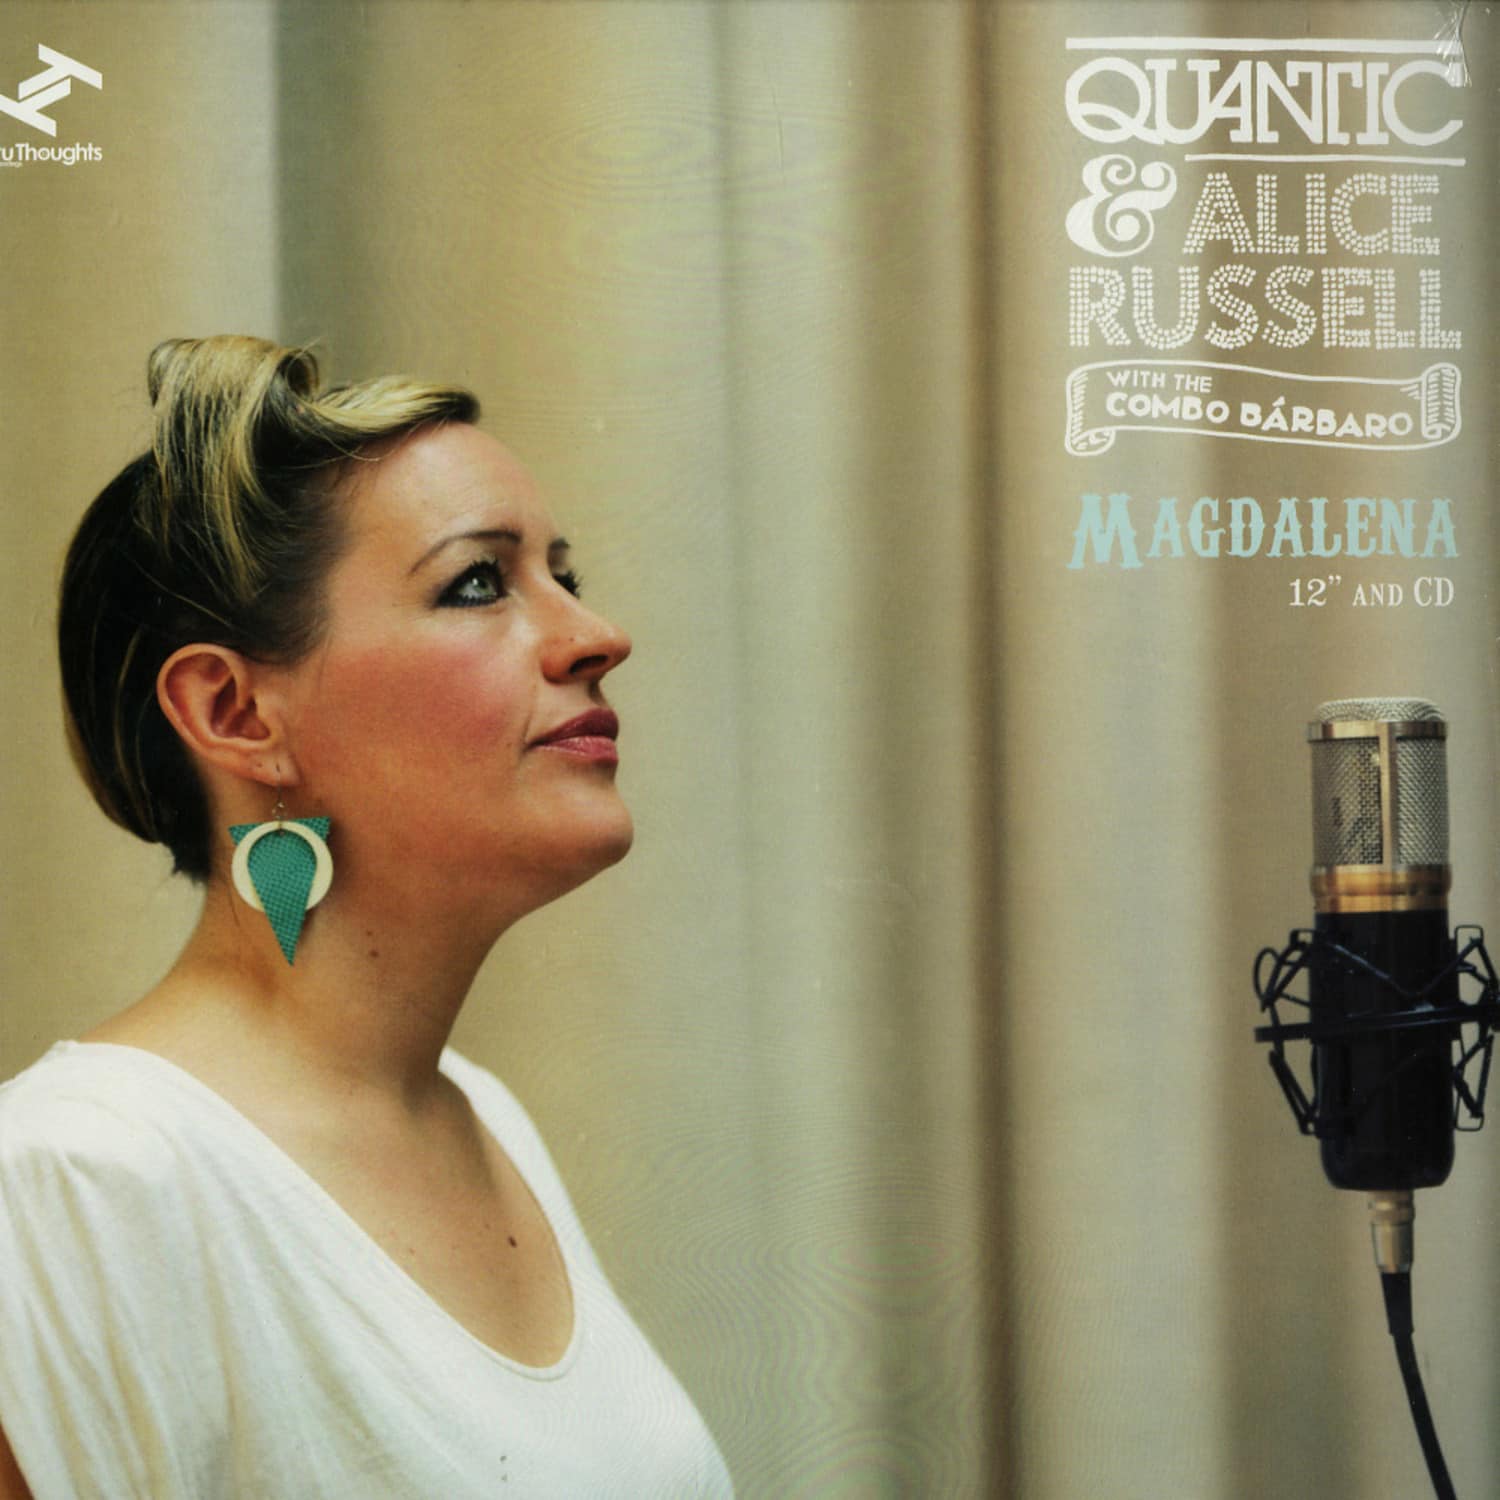 Quantic & Alice Russell - MAGDALENA 